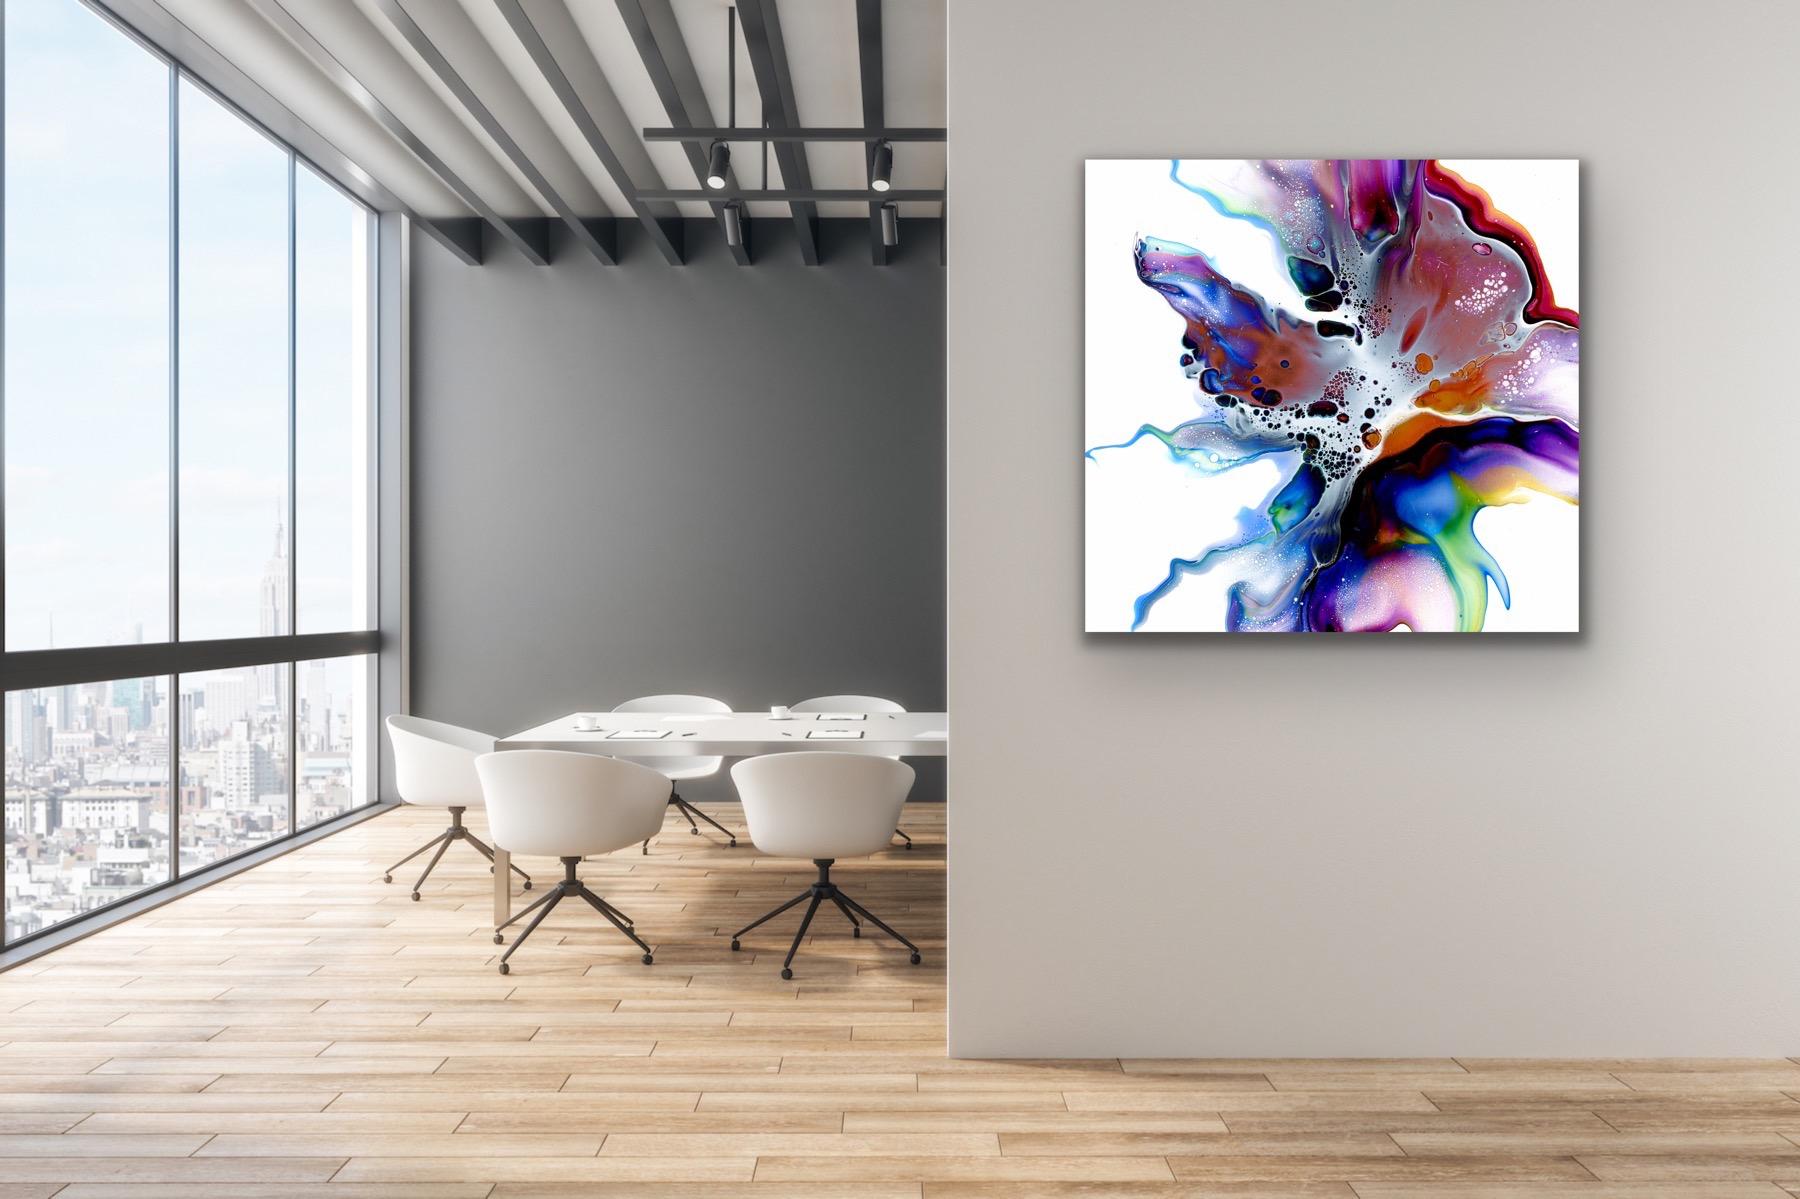 This contemporary modern abstract painting is printed on a lightweight metal composite and comes ready to hang. This vibrant composition can be hung both indoor and outdoor as it is weather resistant.

-Title: Prism
-Artist: Celeste Reiter
-Limited